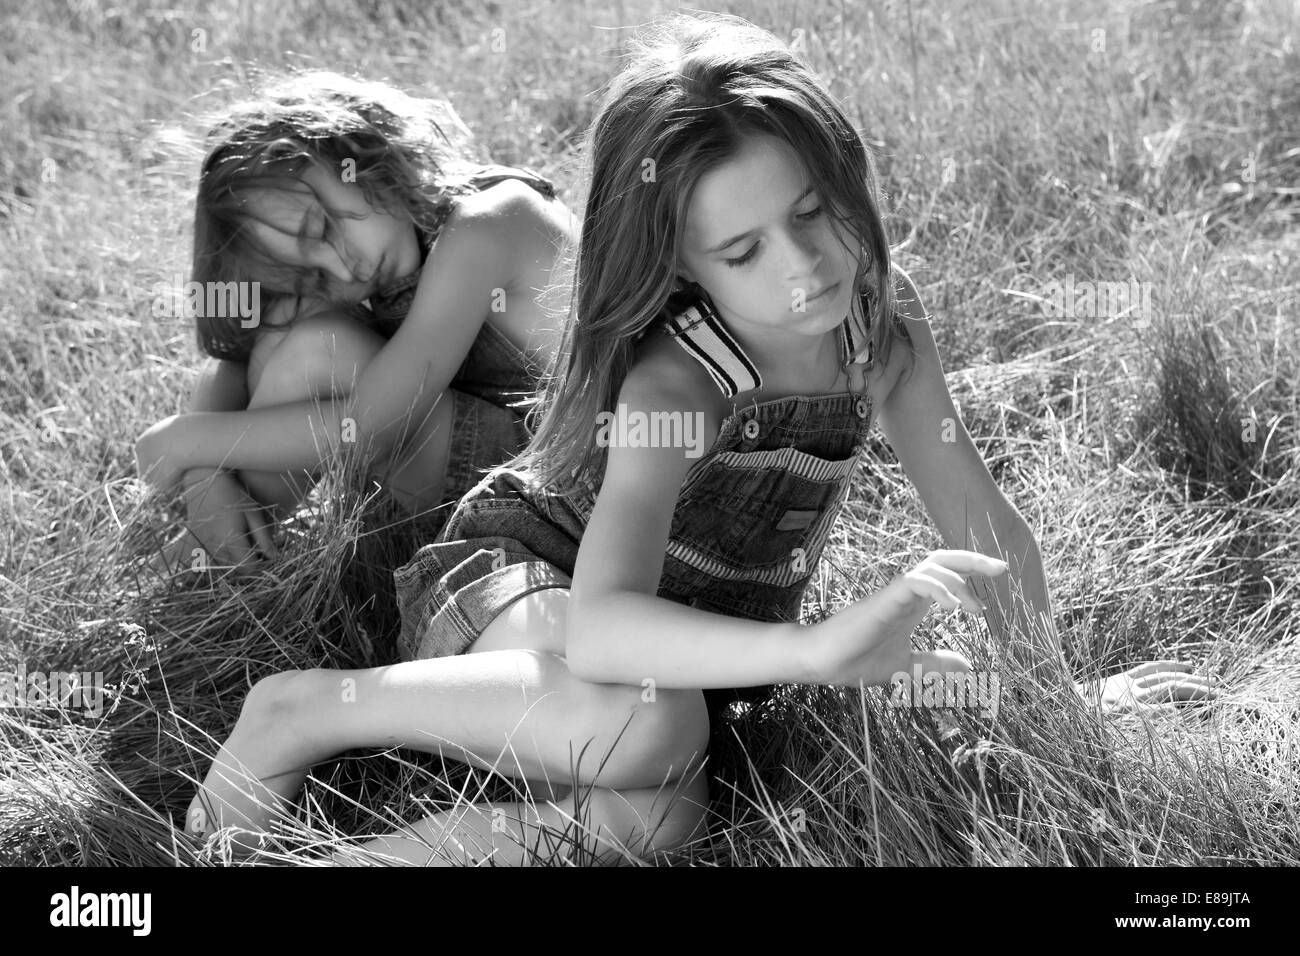 Girls in overalls in field of tall grass Stock Photo